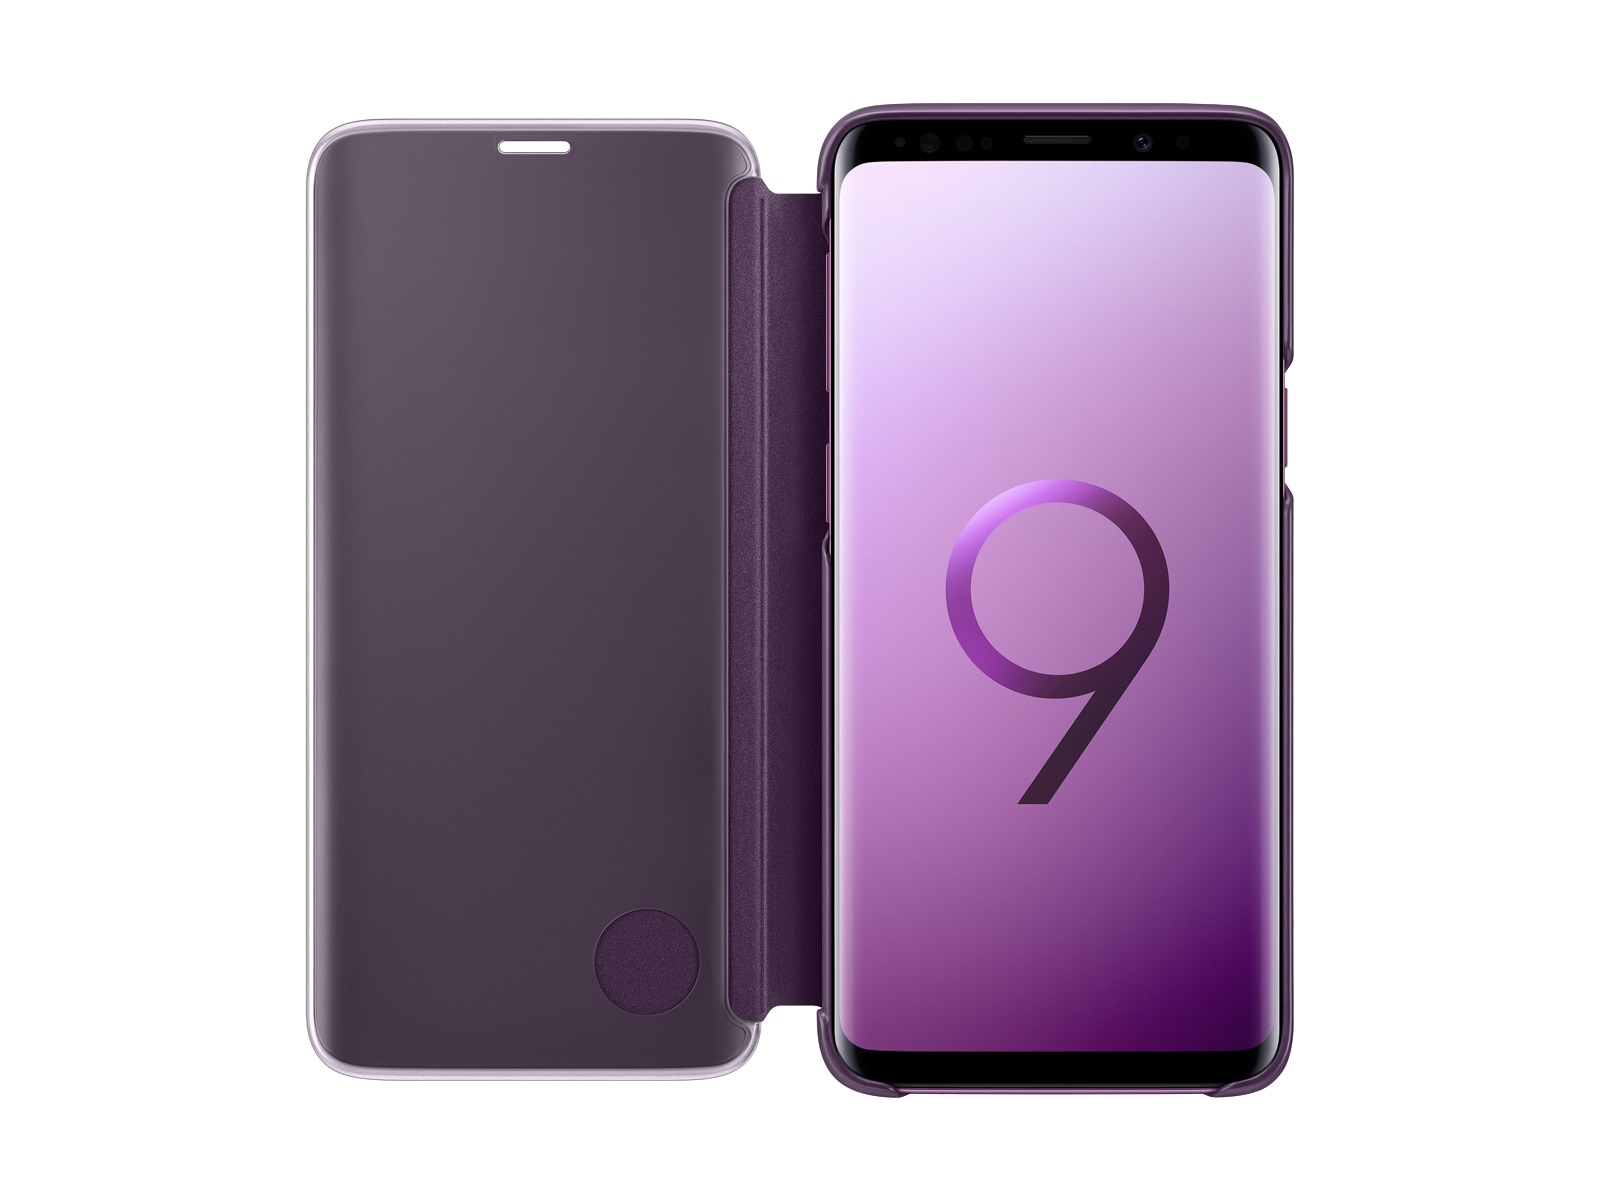 Thumbnail image of Galaxy S9 S-View Cover, Violet